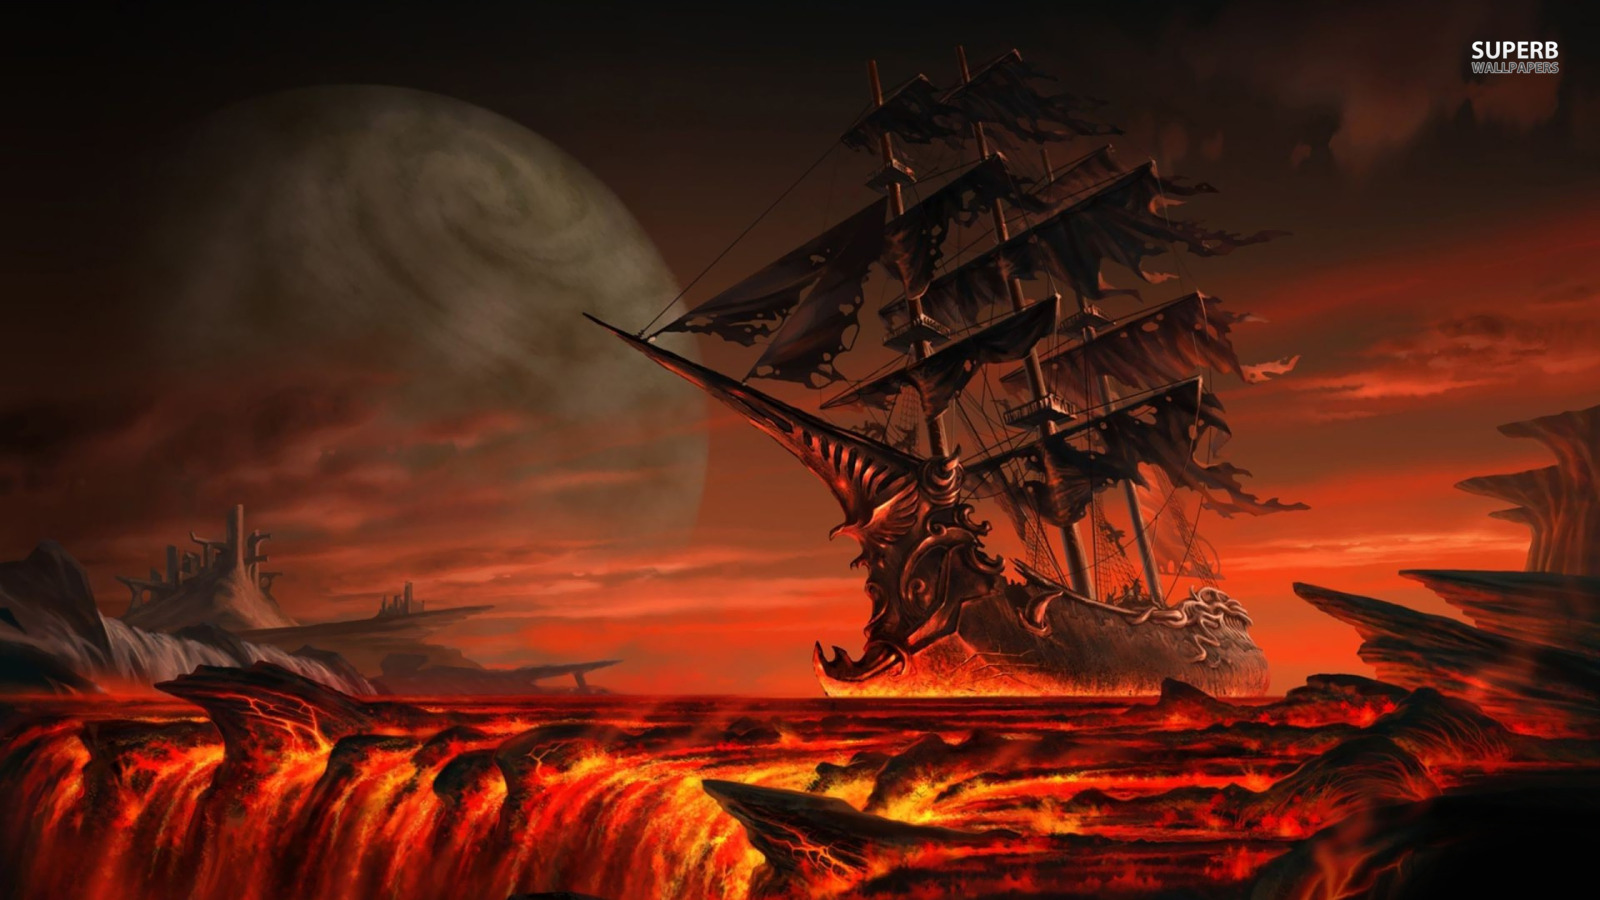 Ghost Ship - Pirate Ship In Lava , HD Wallpaper & Backgrounds